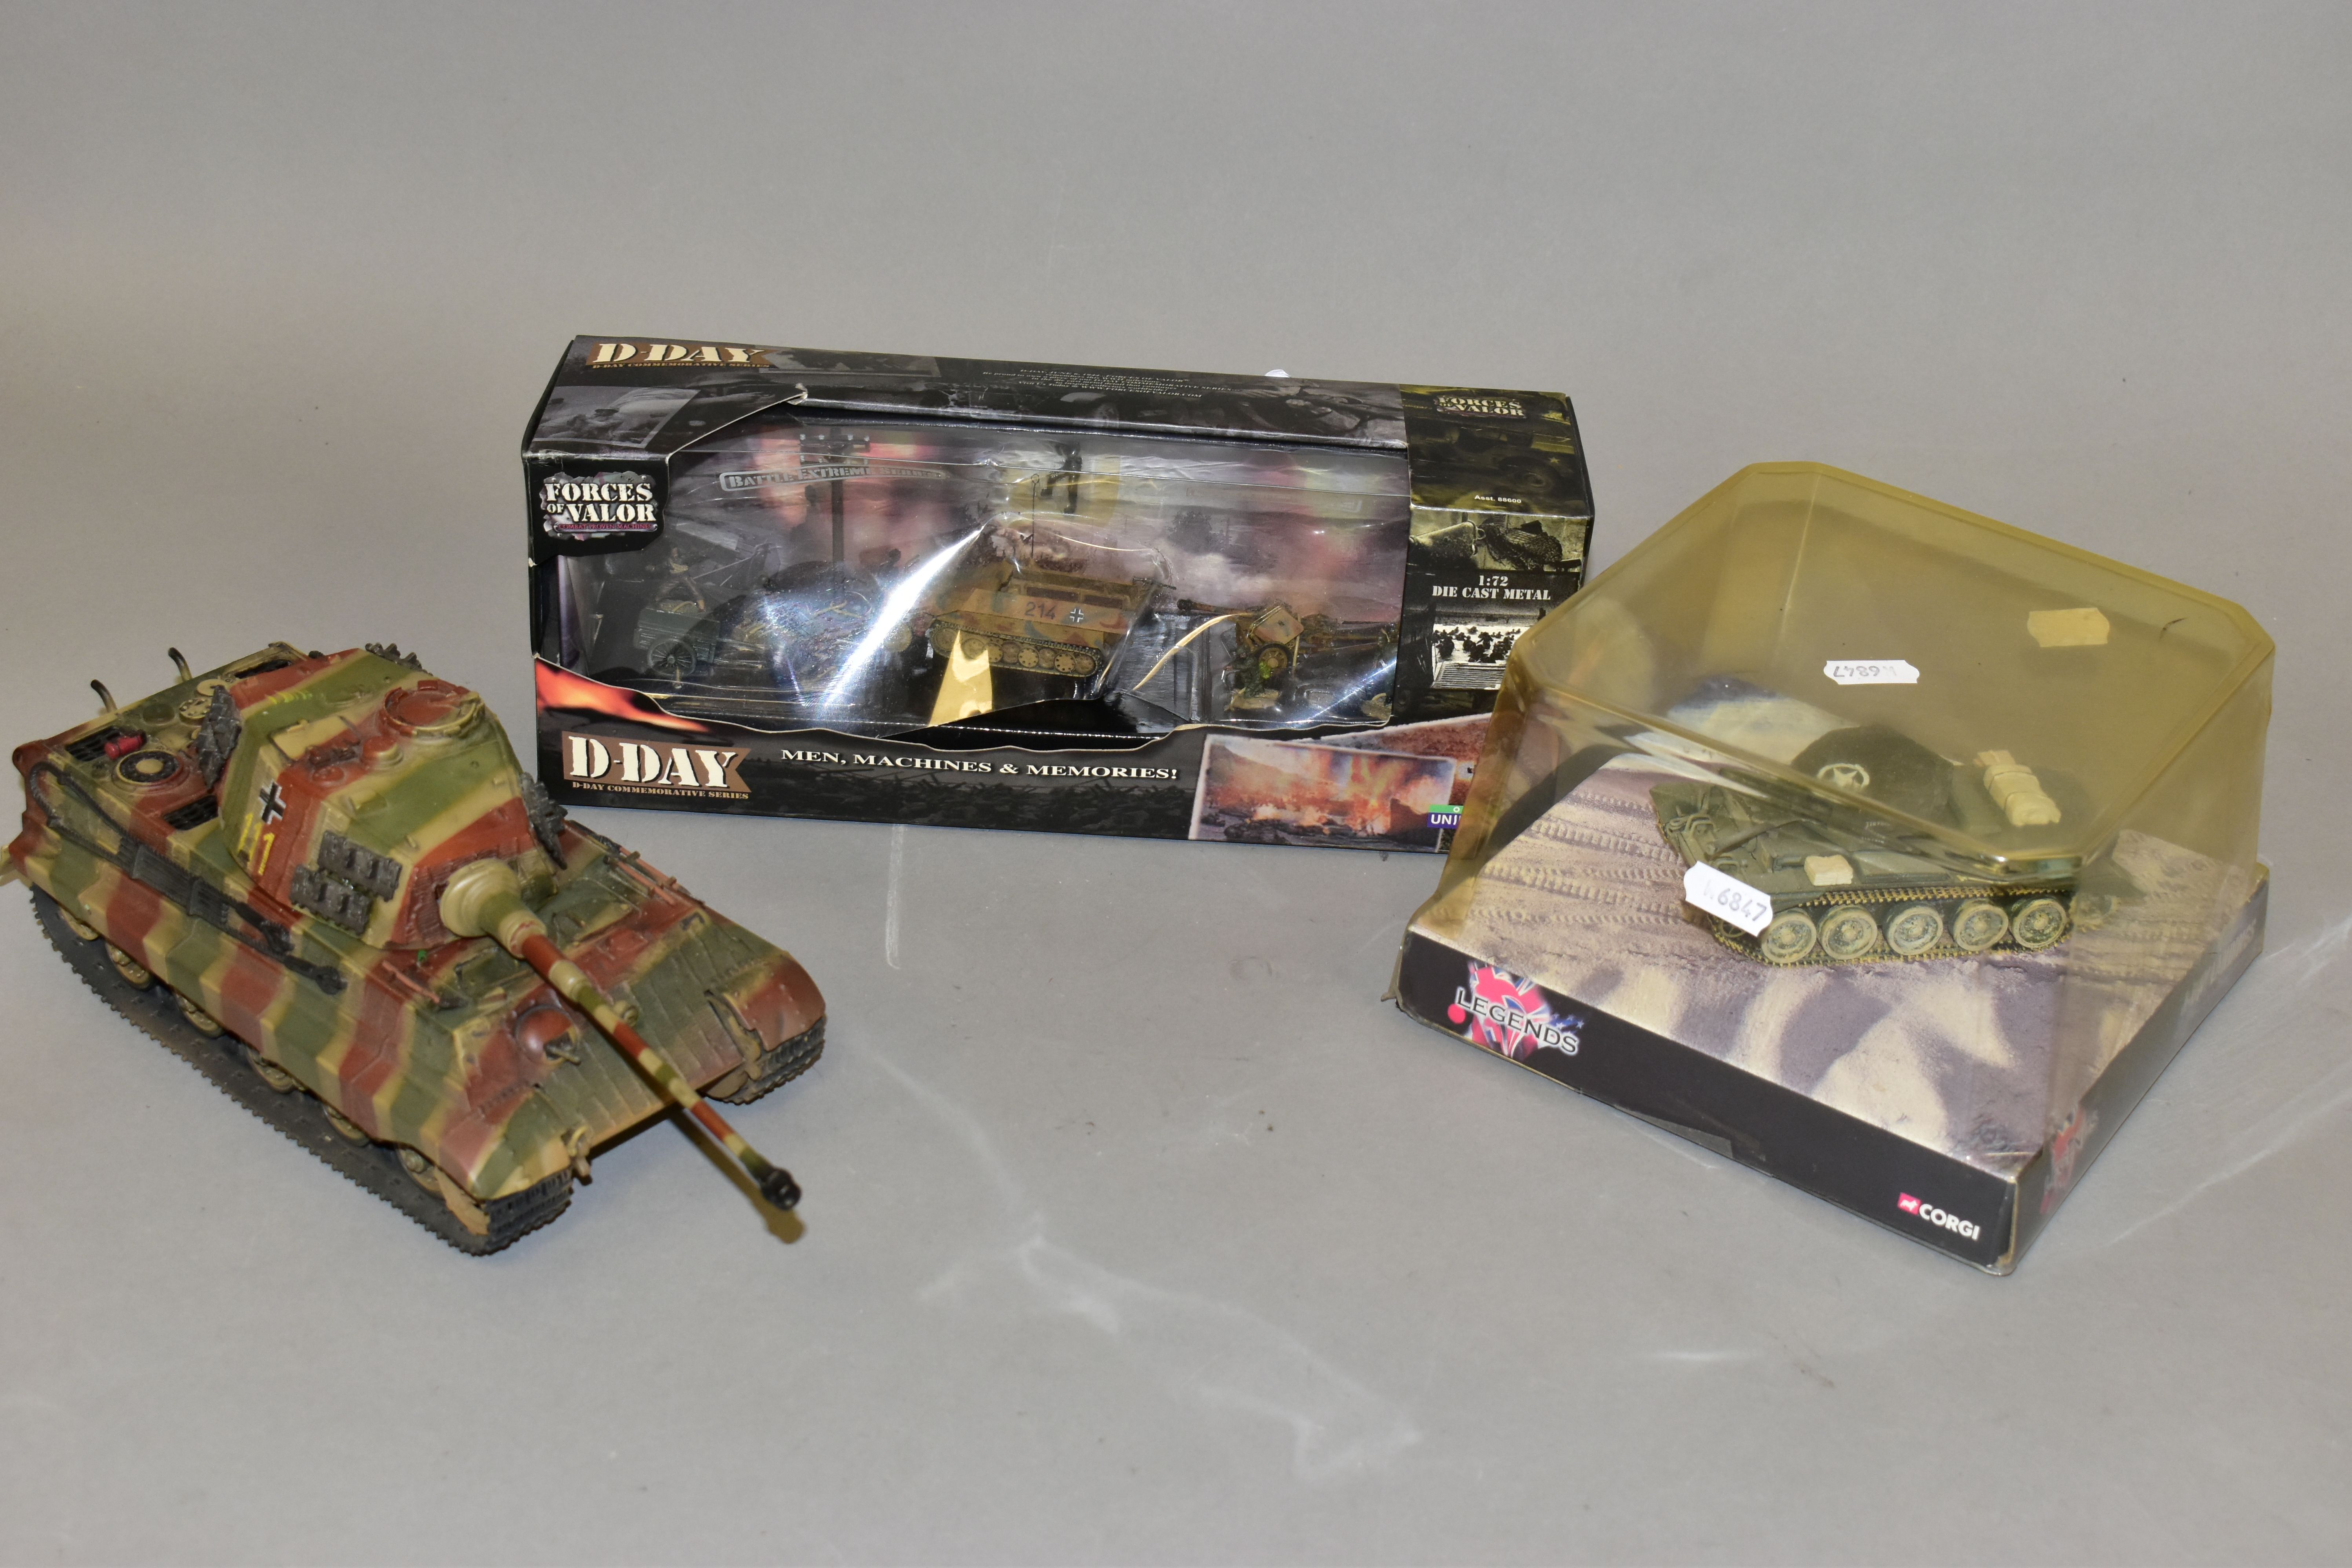 AN UNBOXED UNIMAX FORCES OF VALOR PANZER TANK MODEL, 1:32 scale, appears largely complete and in